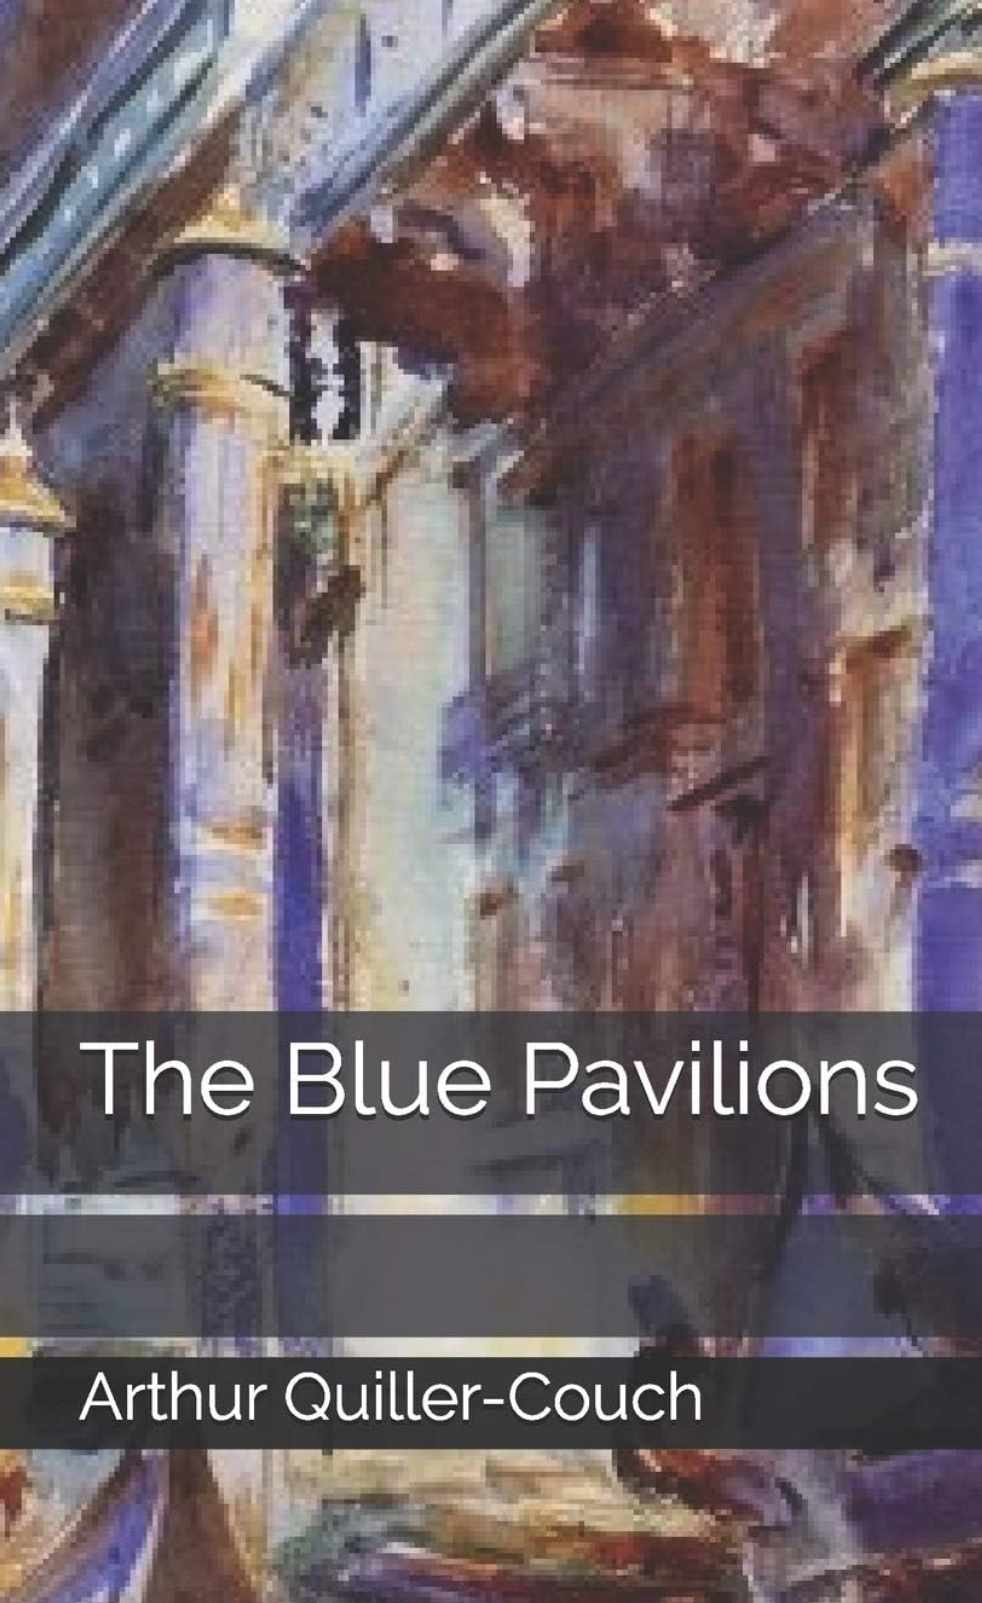 The Blue Pavilions by Arthur Quiller-Couch